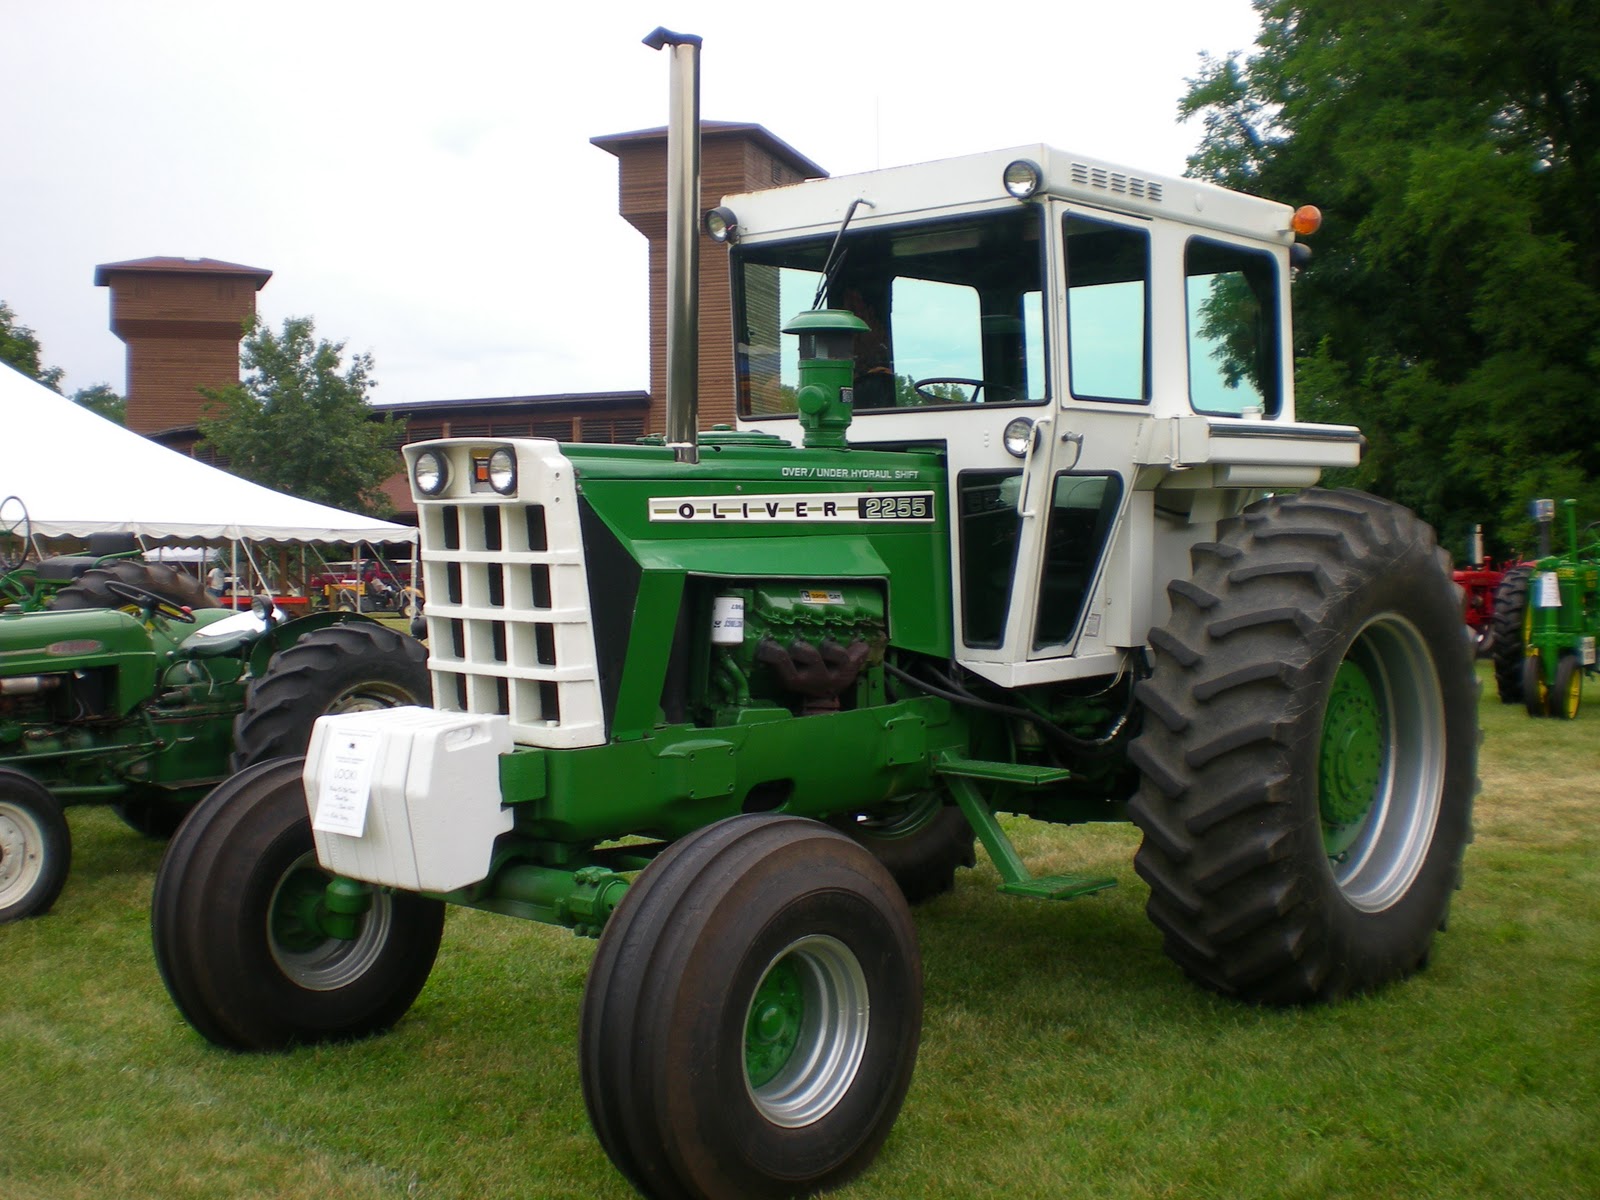 Tractors and Hot Air: Oliver 2255 with a 3208 Cat